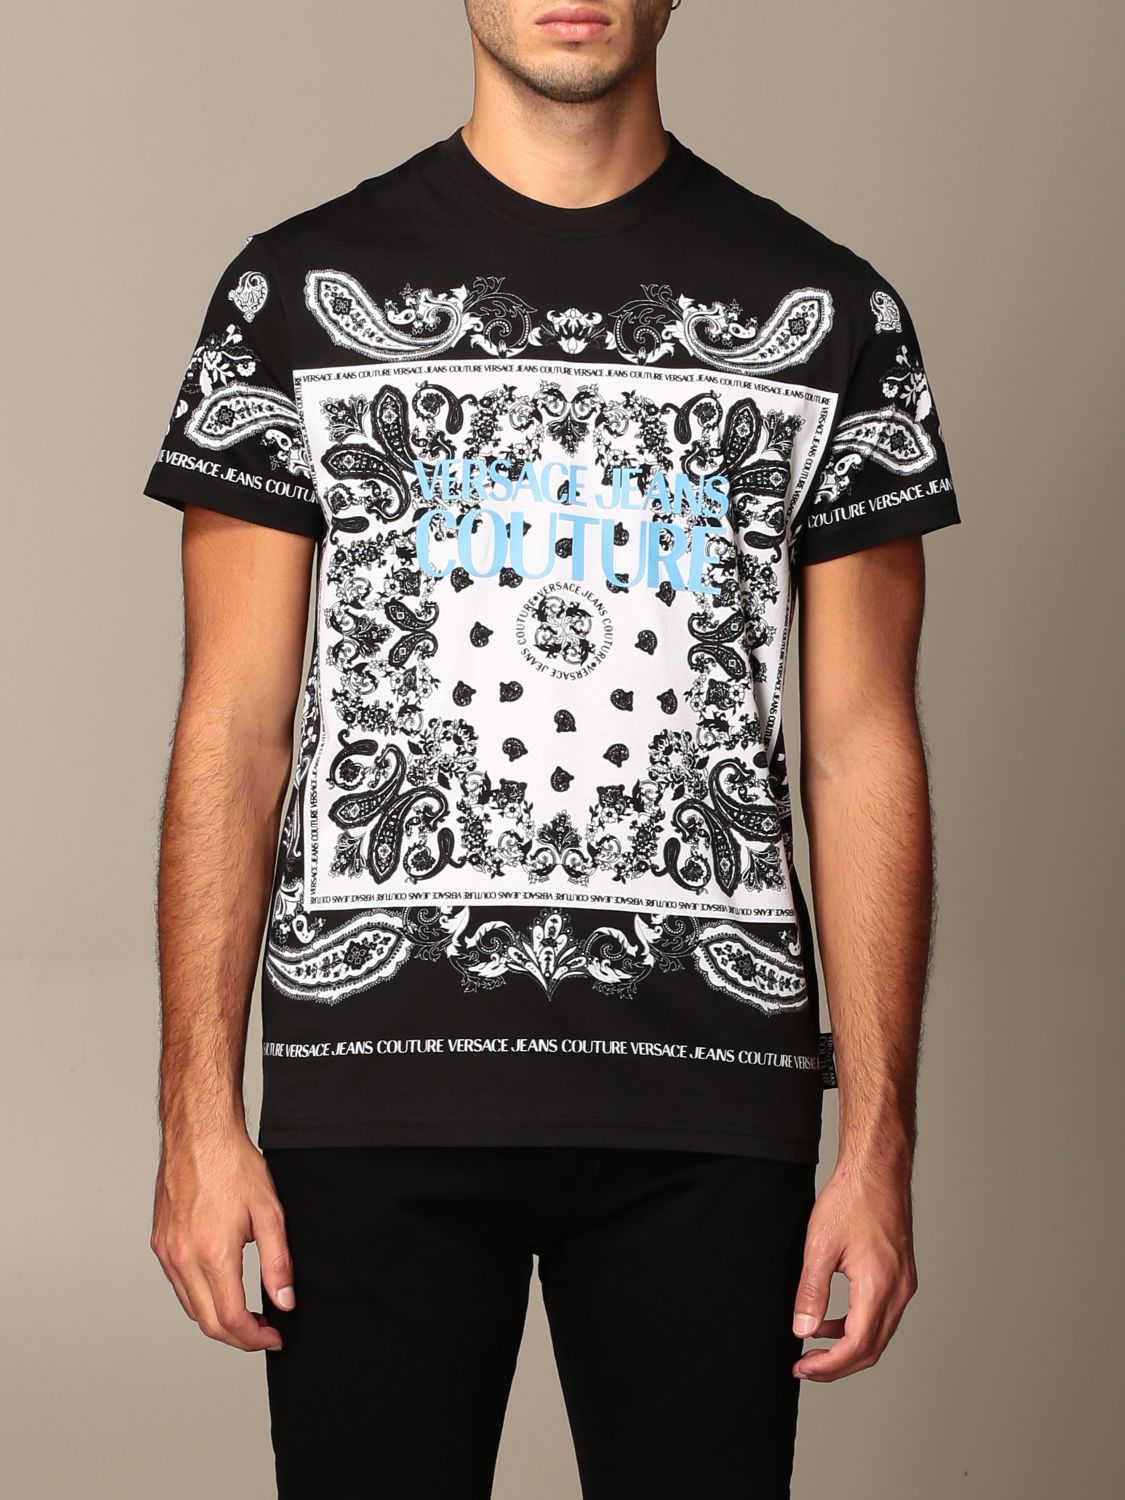 VERSACE JEANS COUTURE PAISLEY  PRINT  T SHIRT-WHITE.